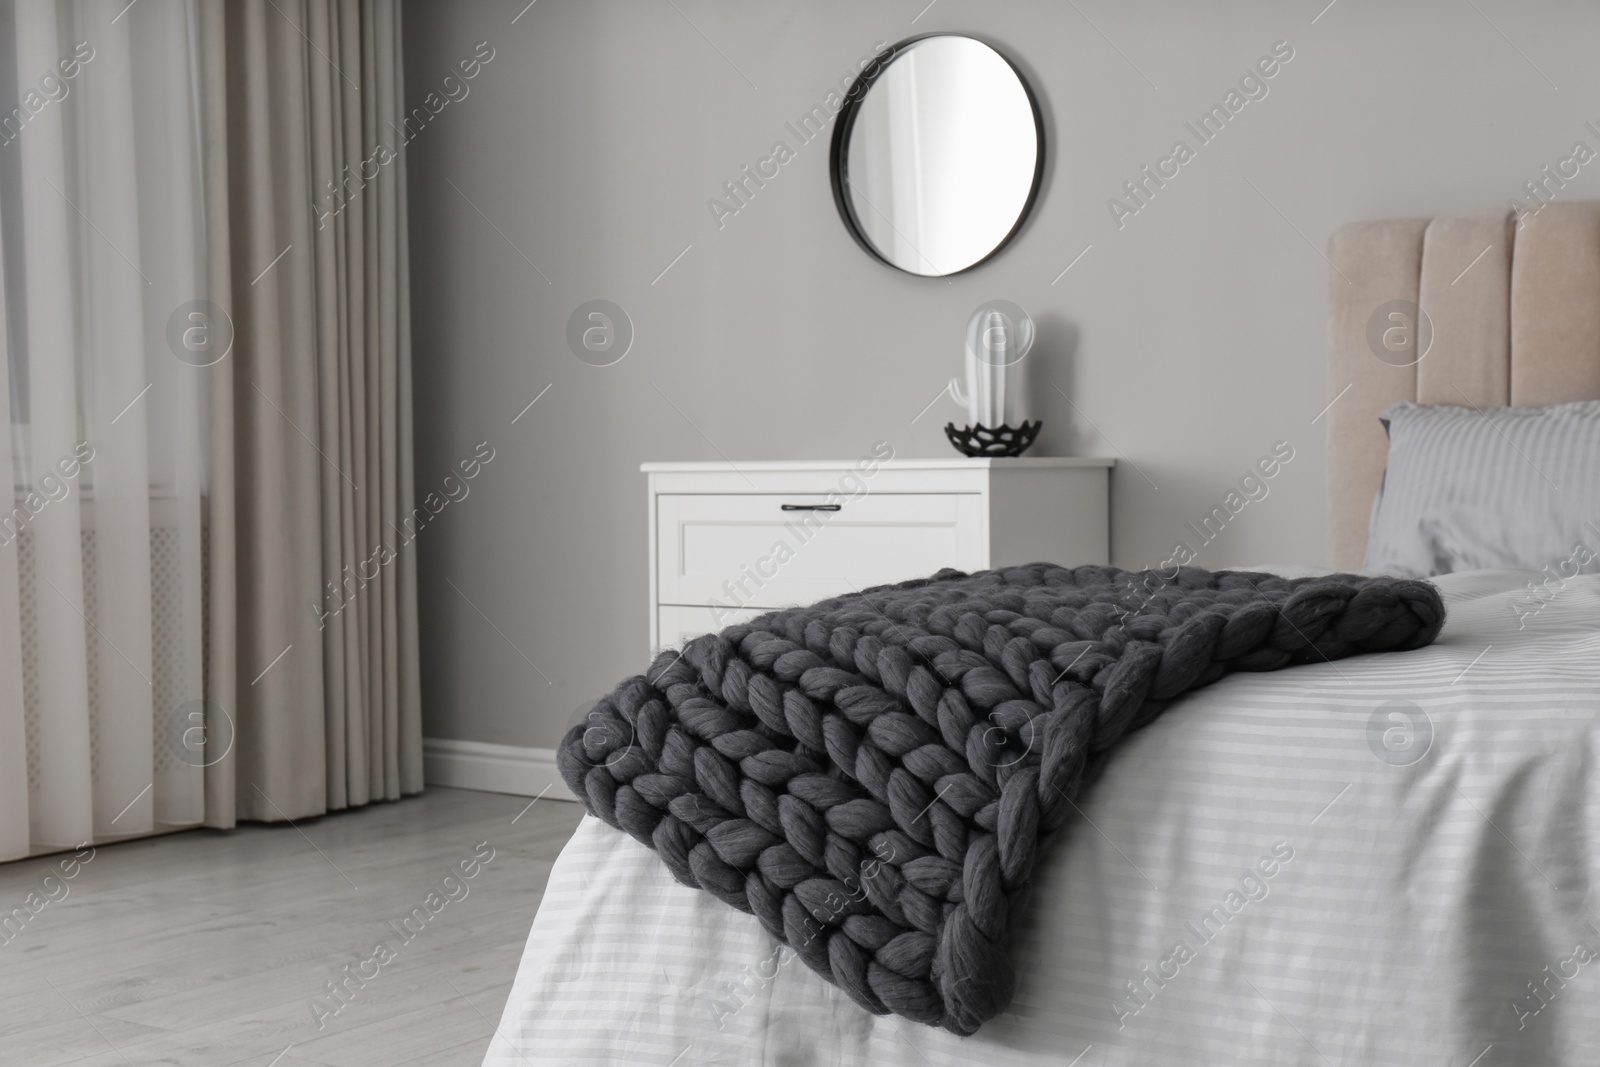 Photo of Knitted merino wool plaid on bed in room